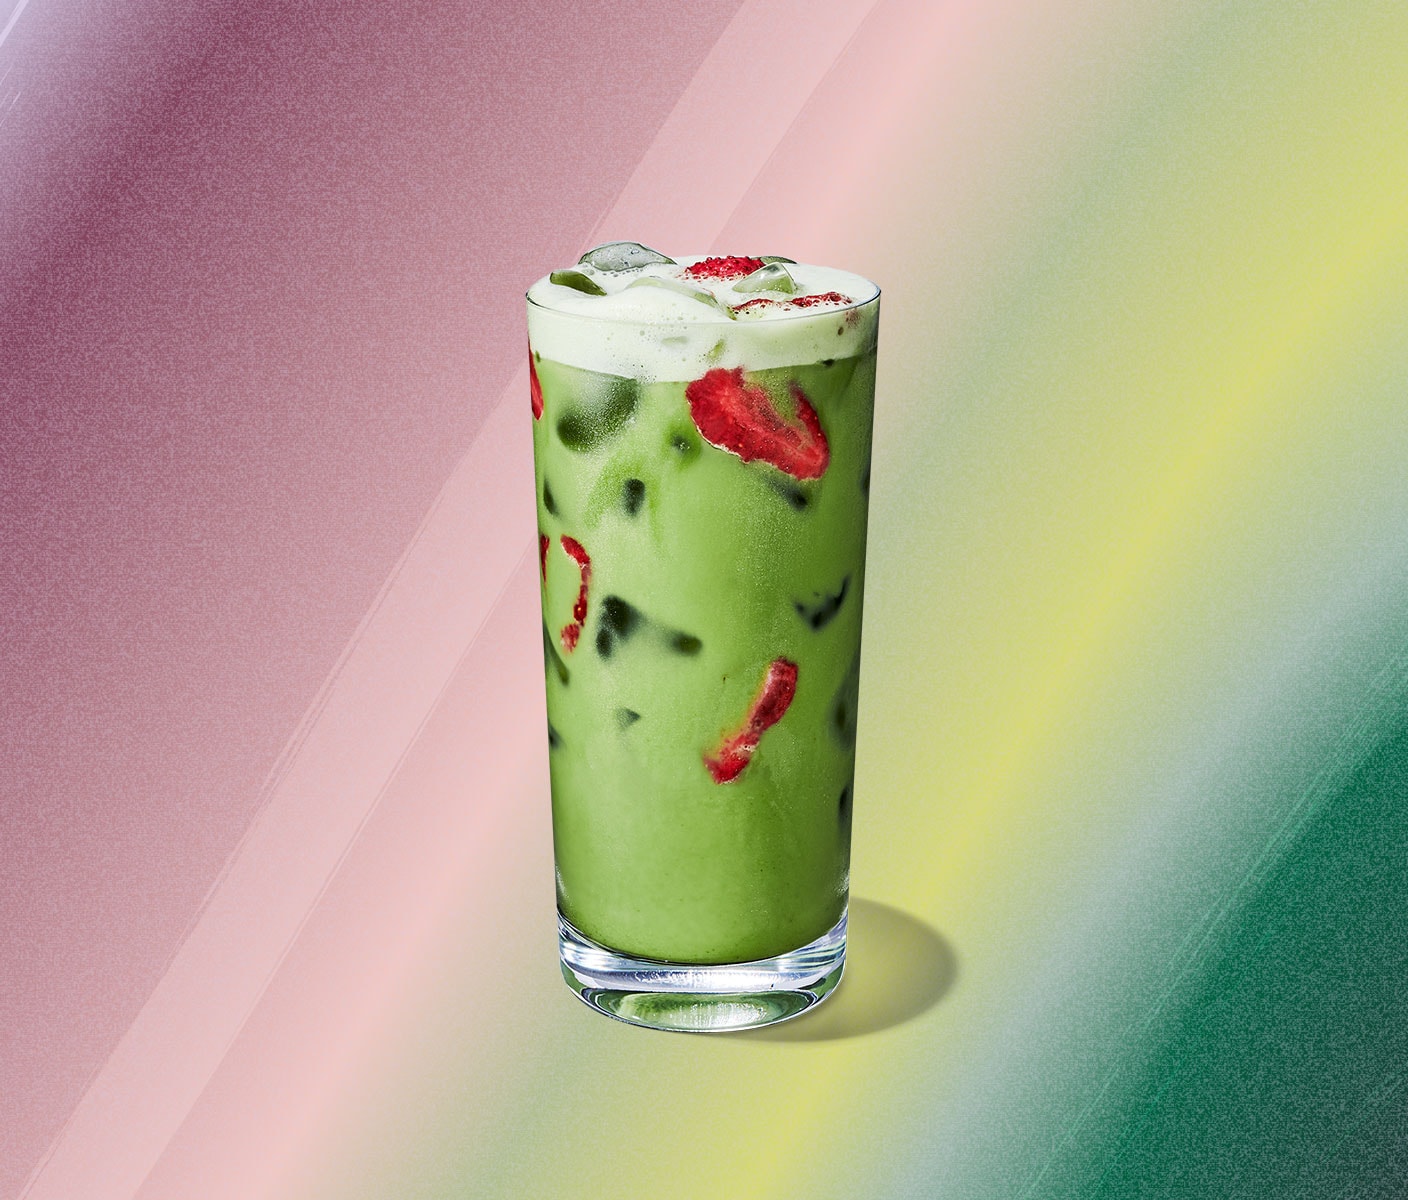 Iced green tea with strawberry inclusions.